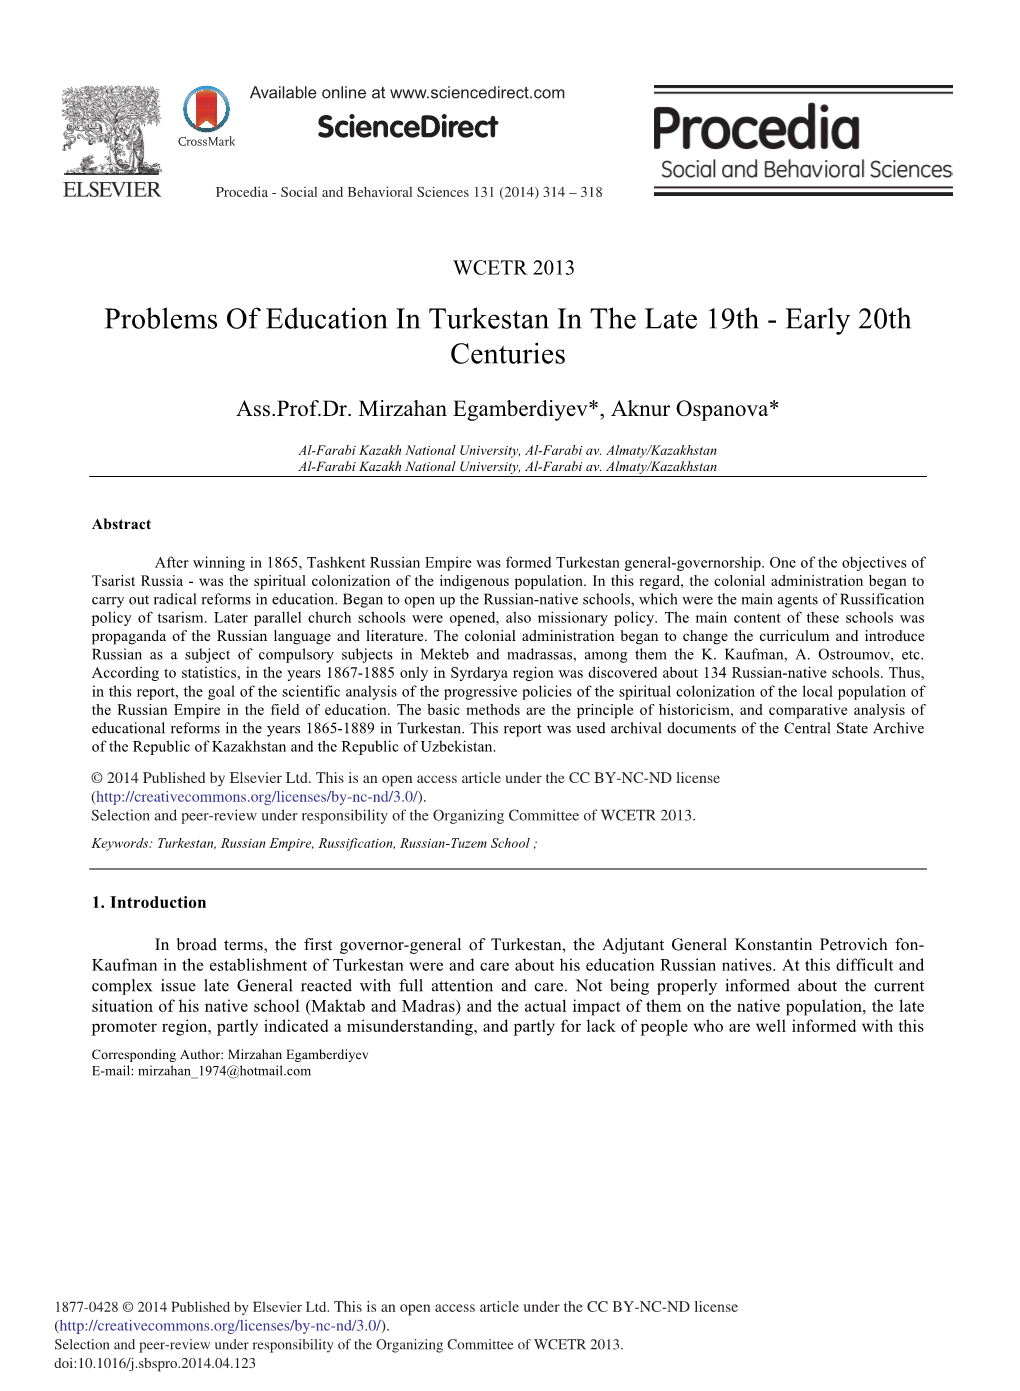 Problems of Education in Turkestan in the Late 19Th - Early 20Th Centuries